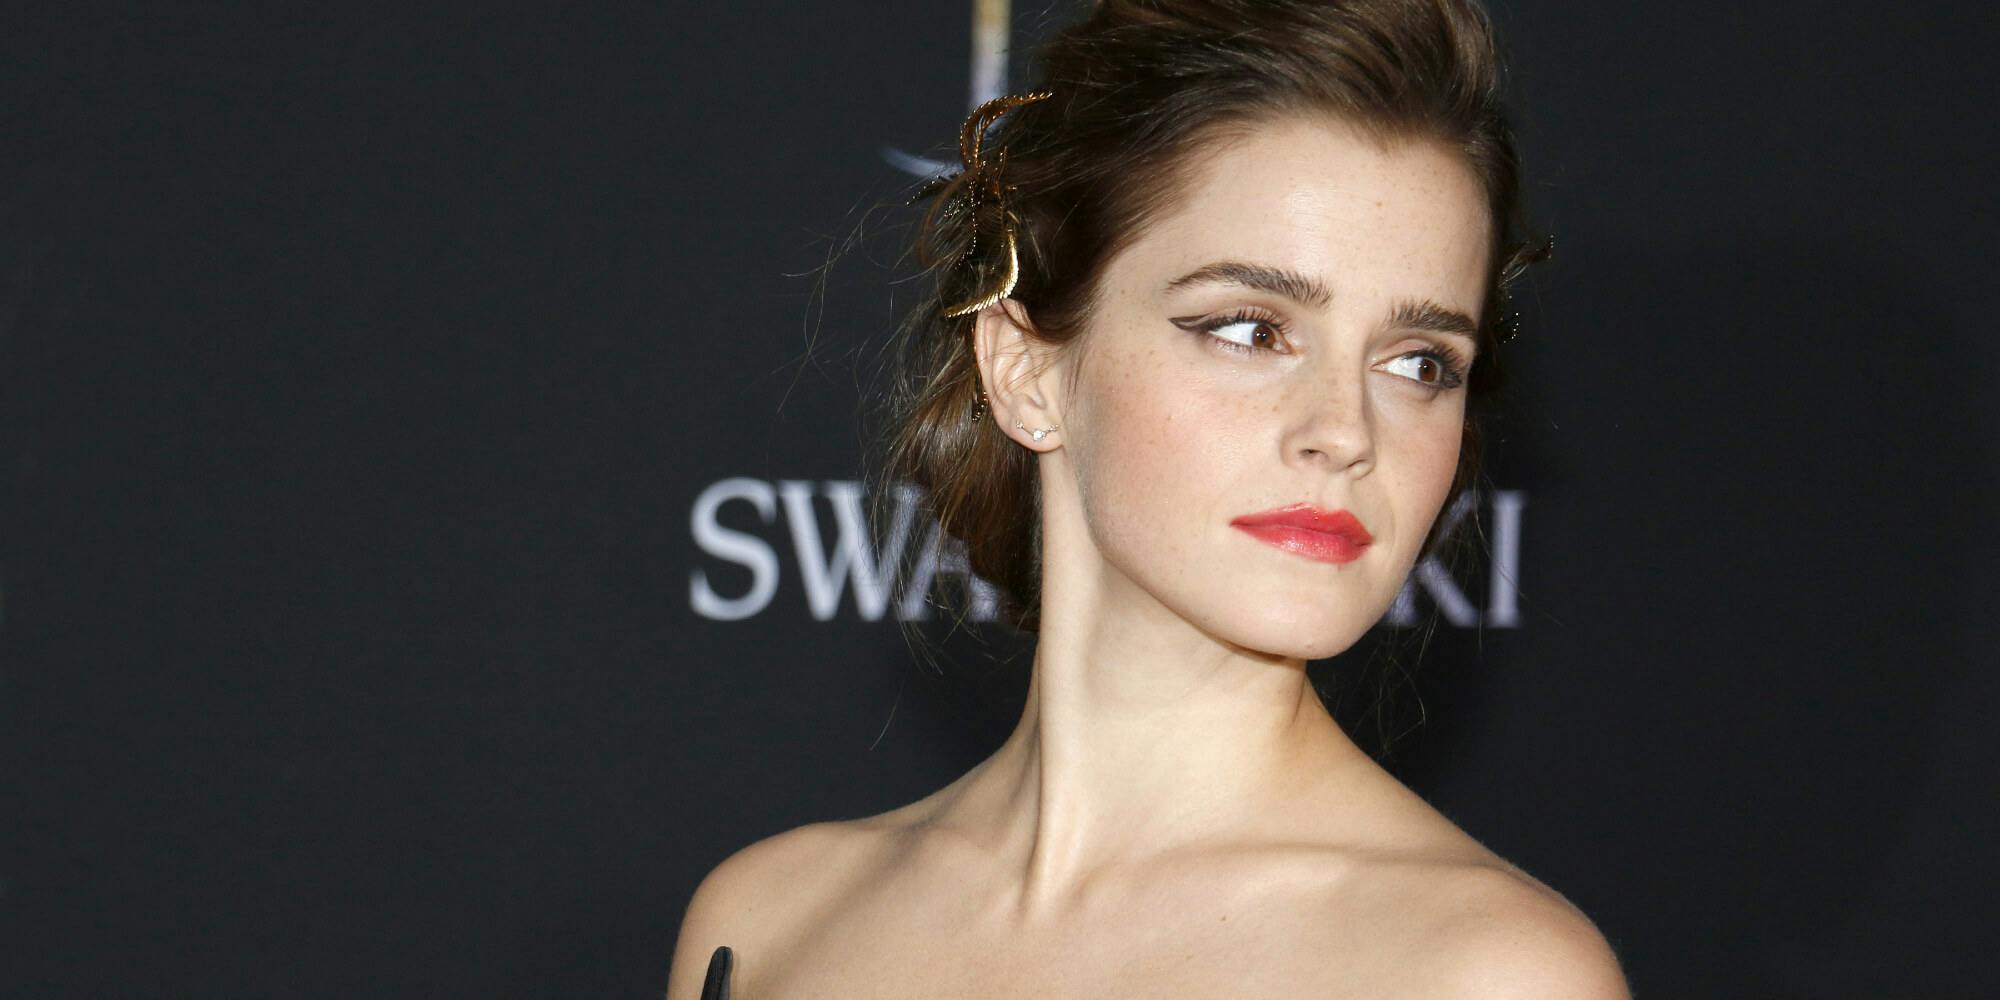 Emma Watson reveals she’s ‘fascinated’ with kink culture